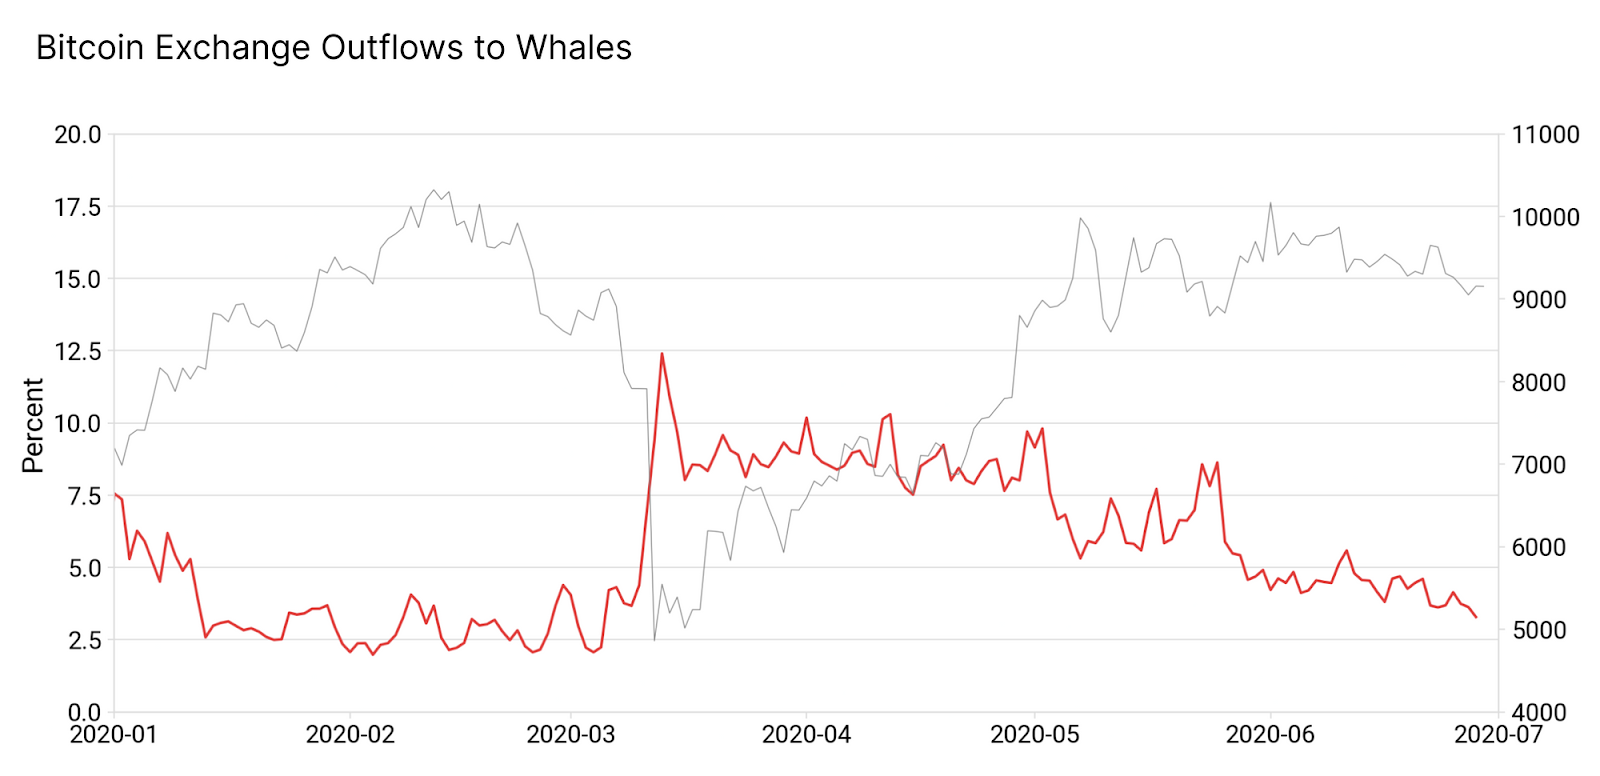 https://insights.glassnode.com/content/images/2020/06/9_exchange_outflows_to_whales.png